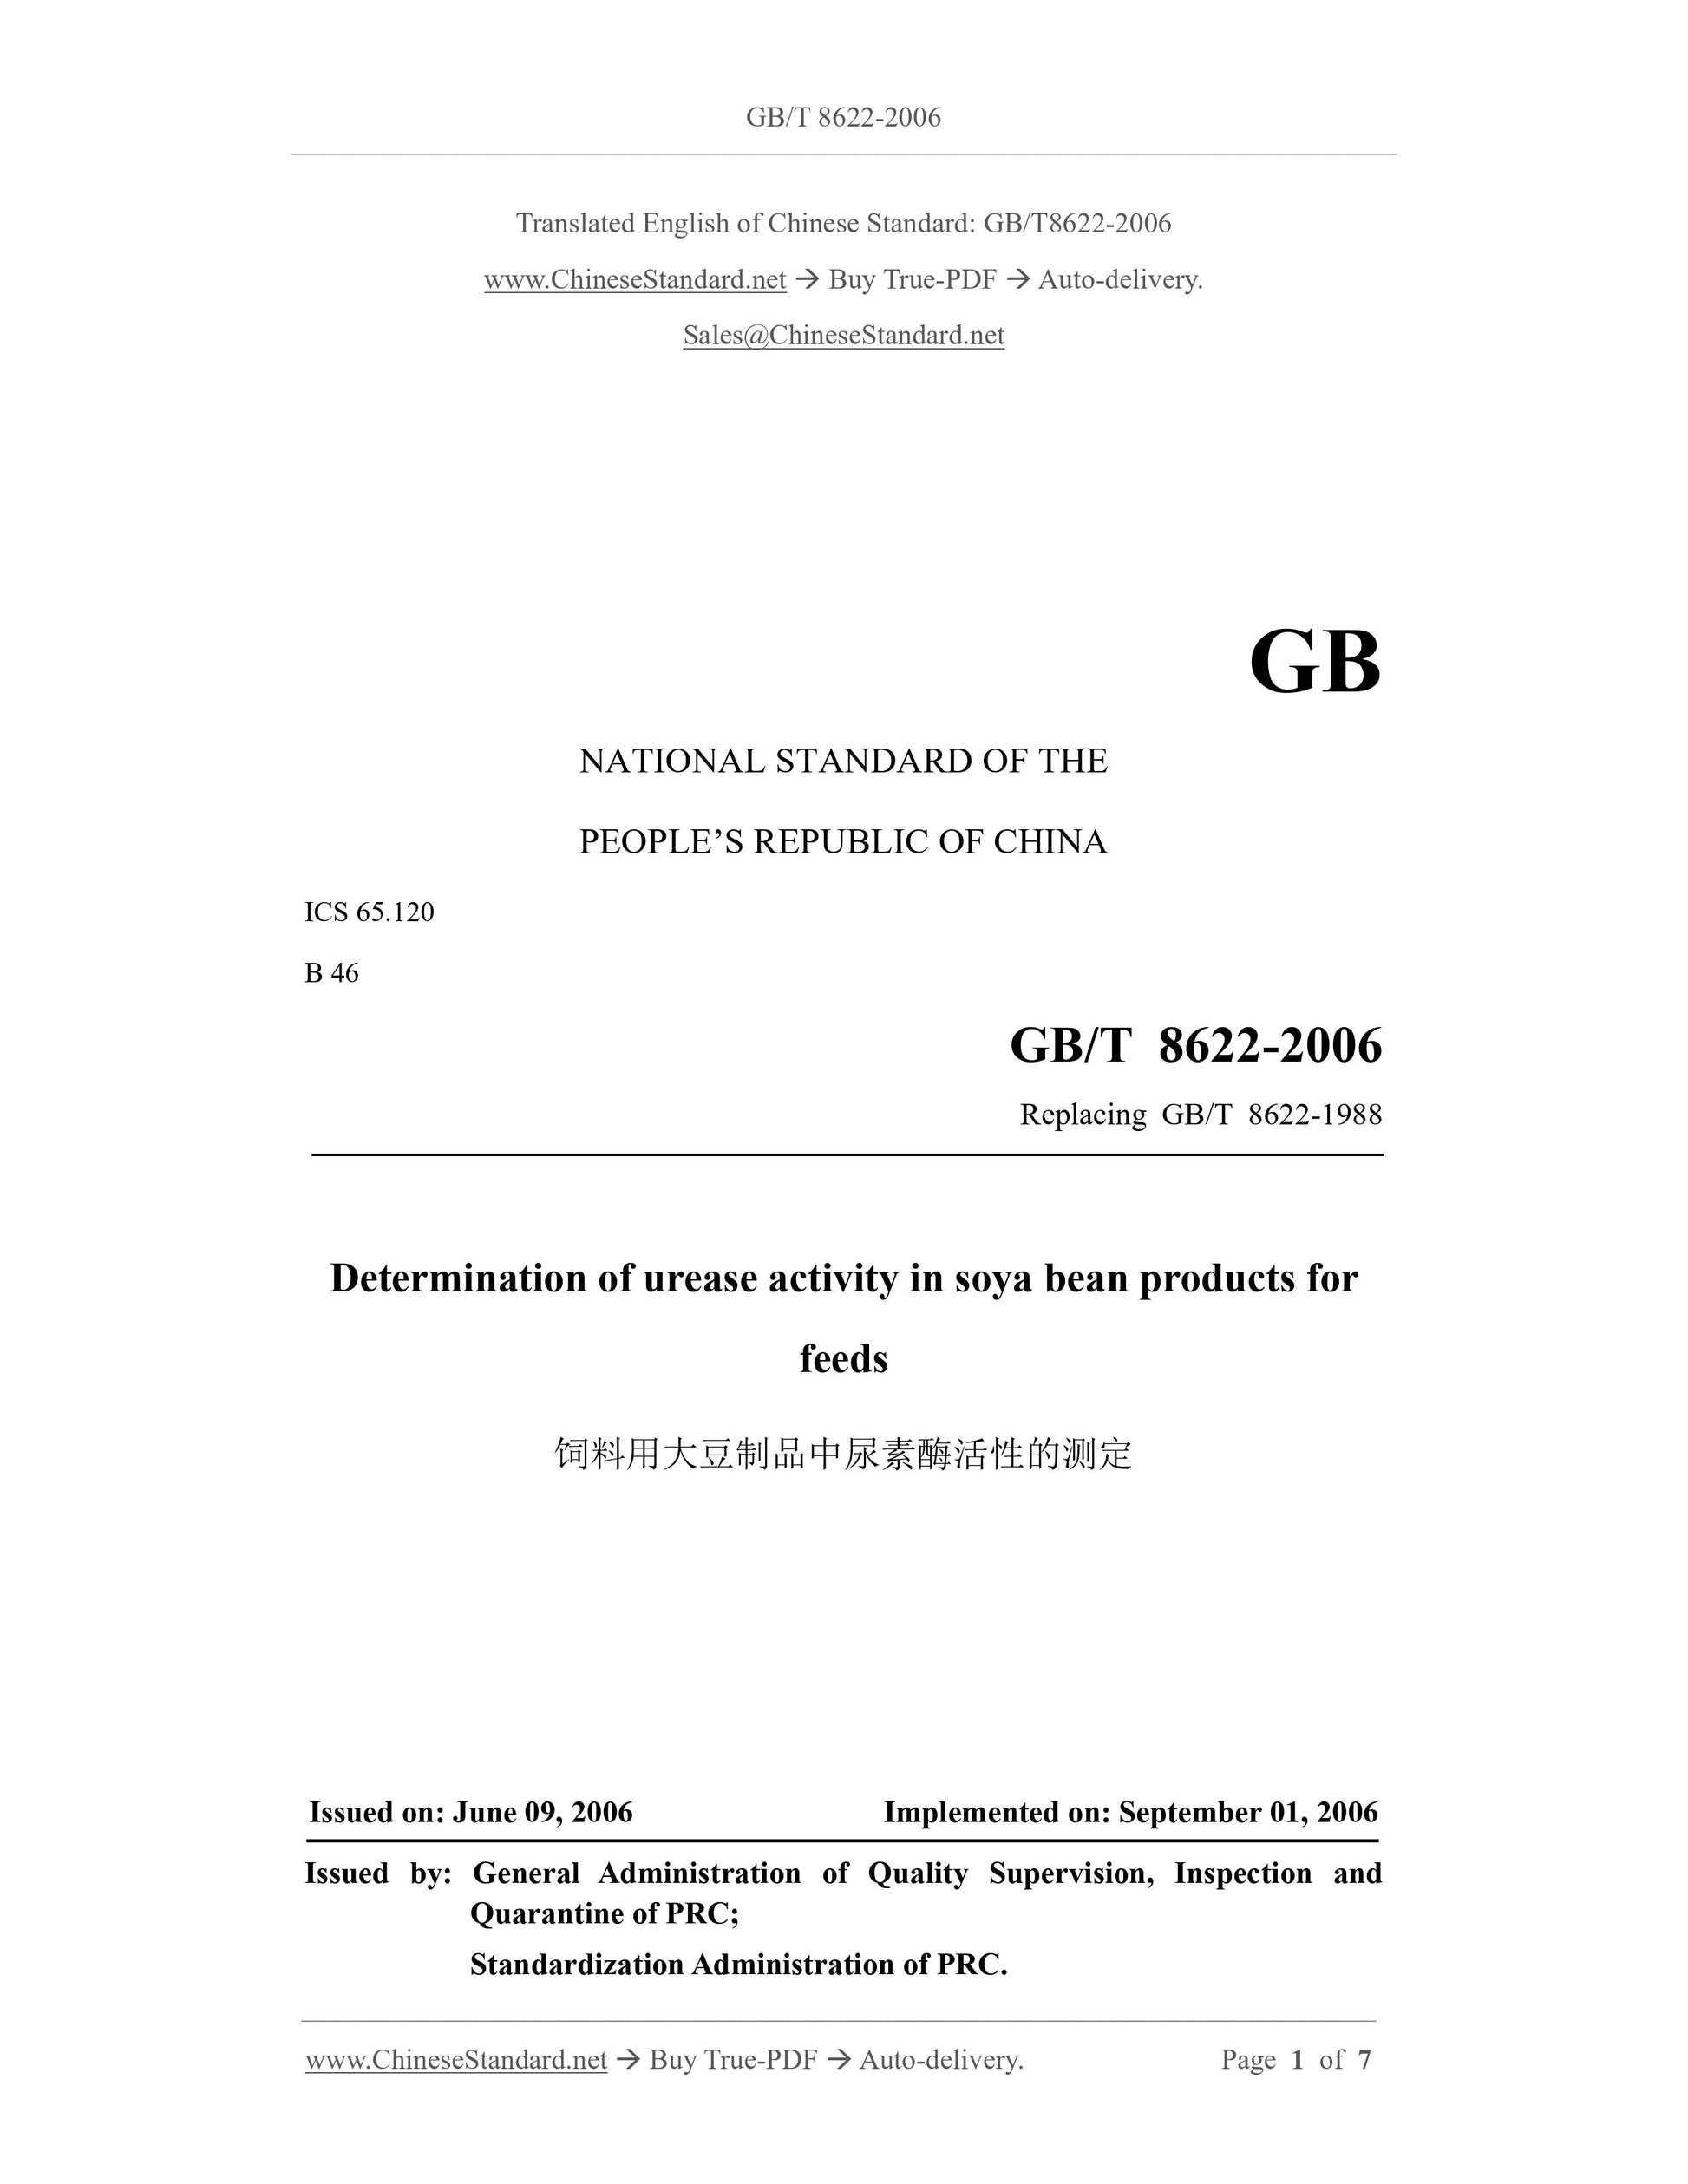 GB/T 8622-2006 Page 1